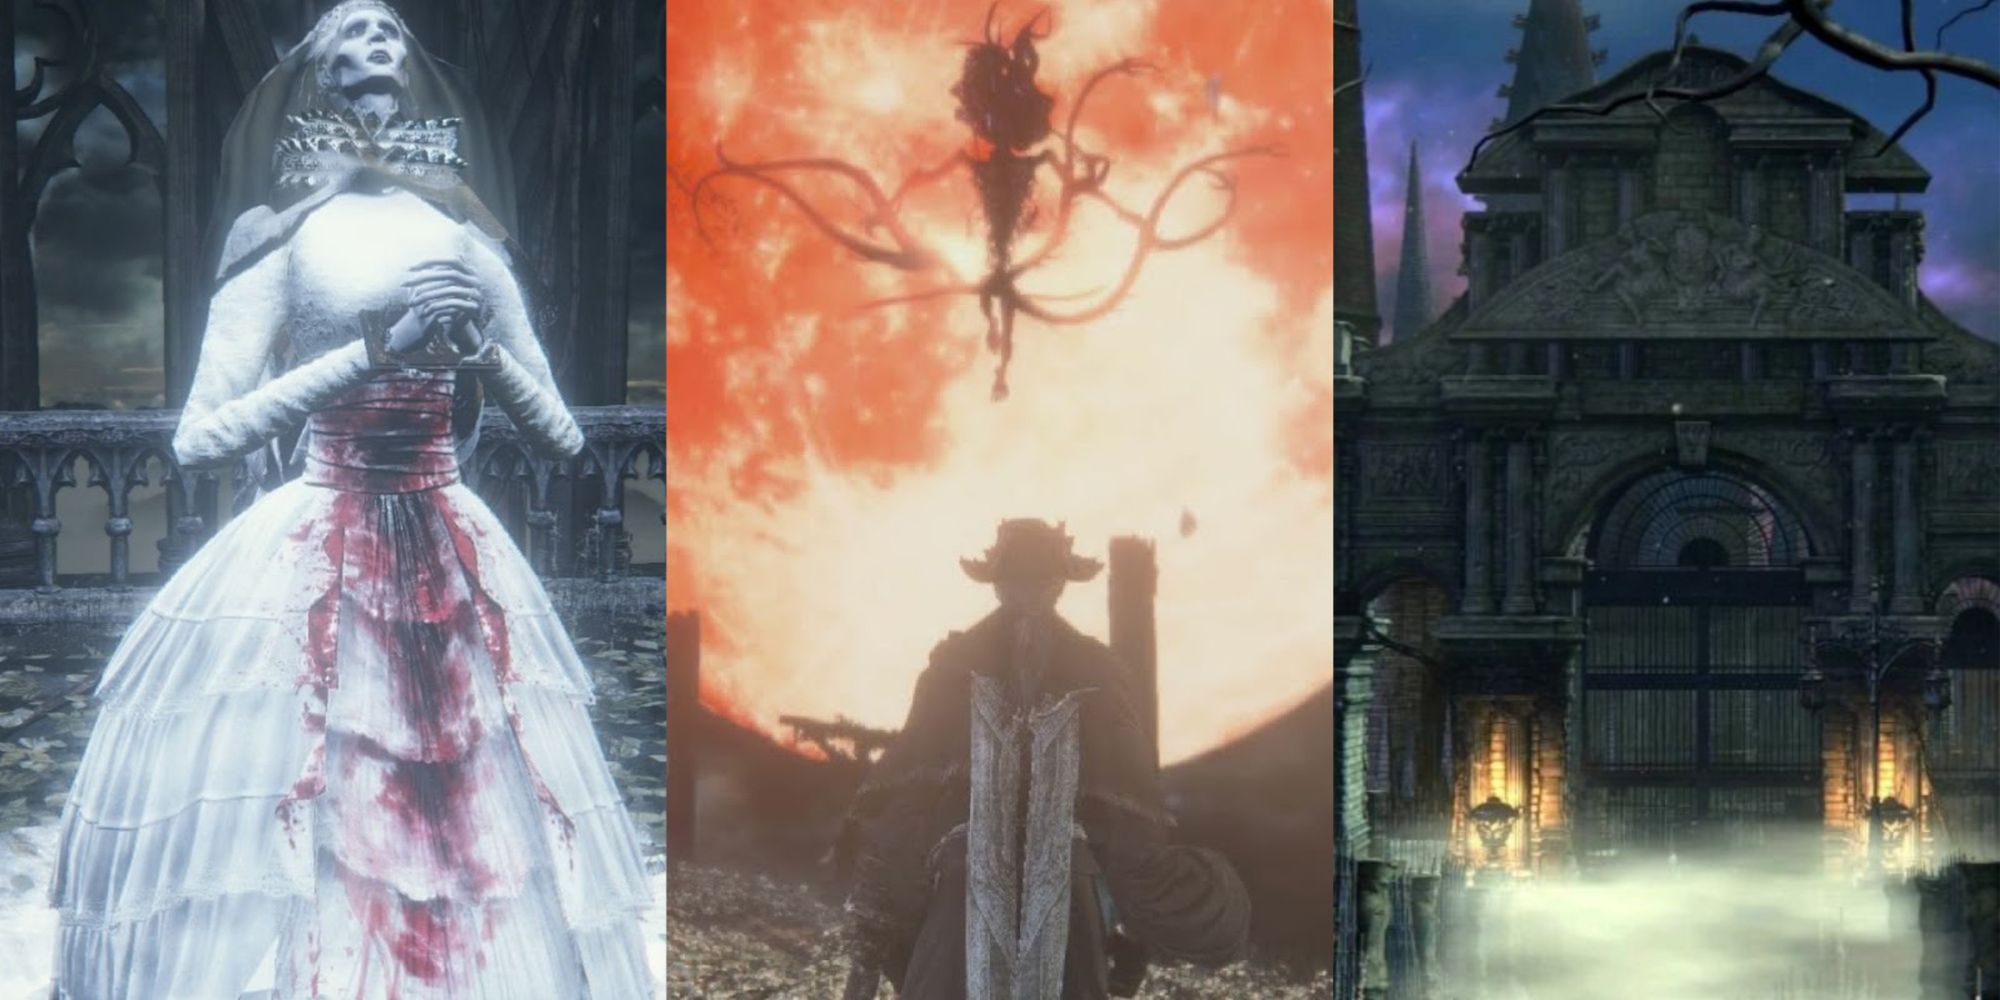 Heartwarming! So nice to see the citizens of Yharnam come together to  celebrate HRHs 70th jubilee! From   : r/bloodborne